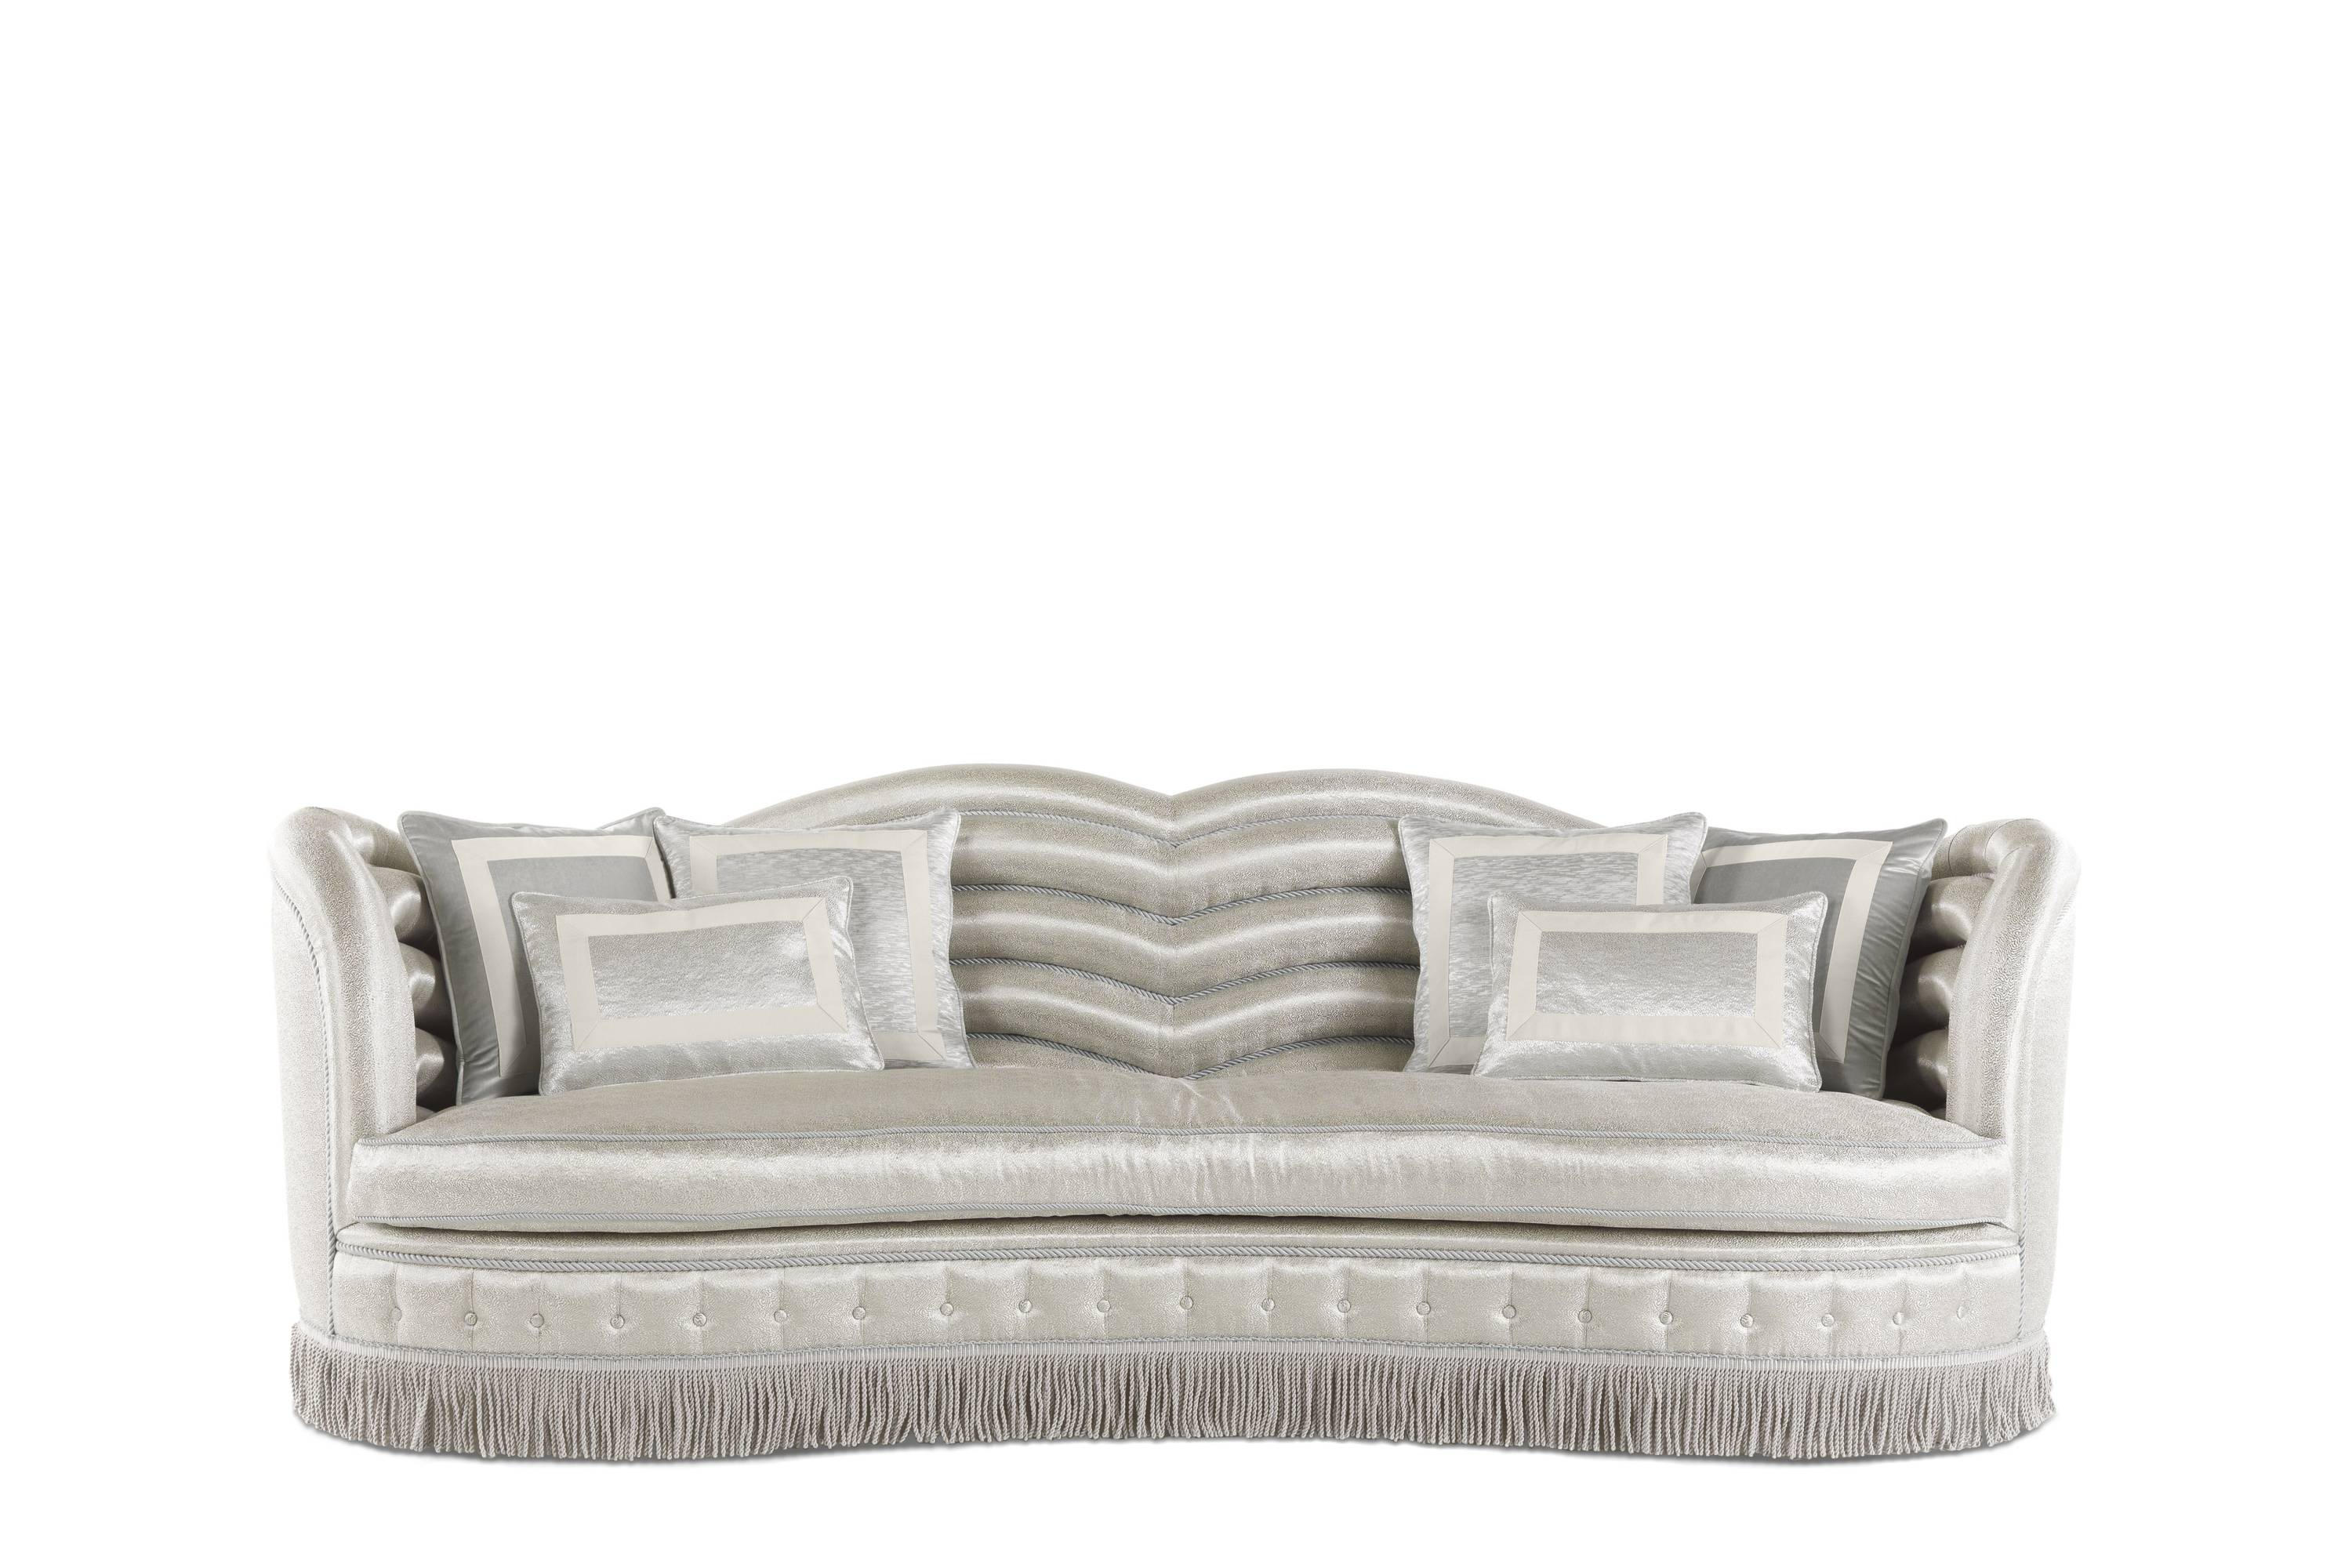 HORIZON 3-seater sofa - sofa - convey elegance to each space with Italian classic sofas of the classic Savoir-Faire collection